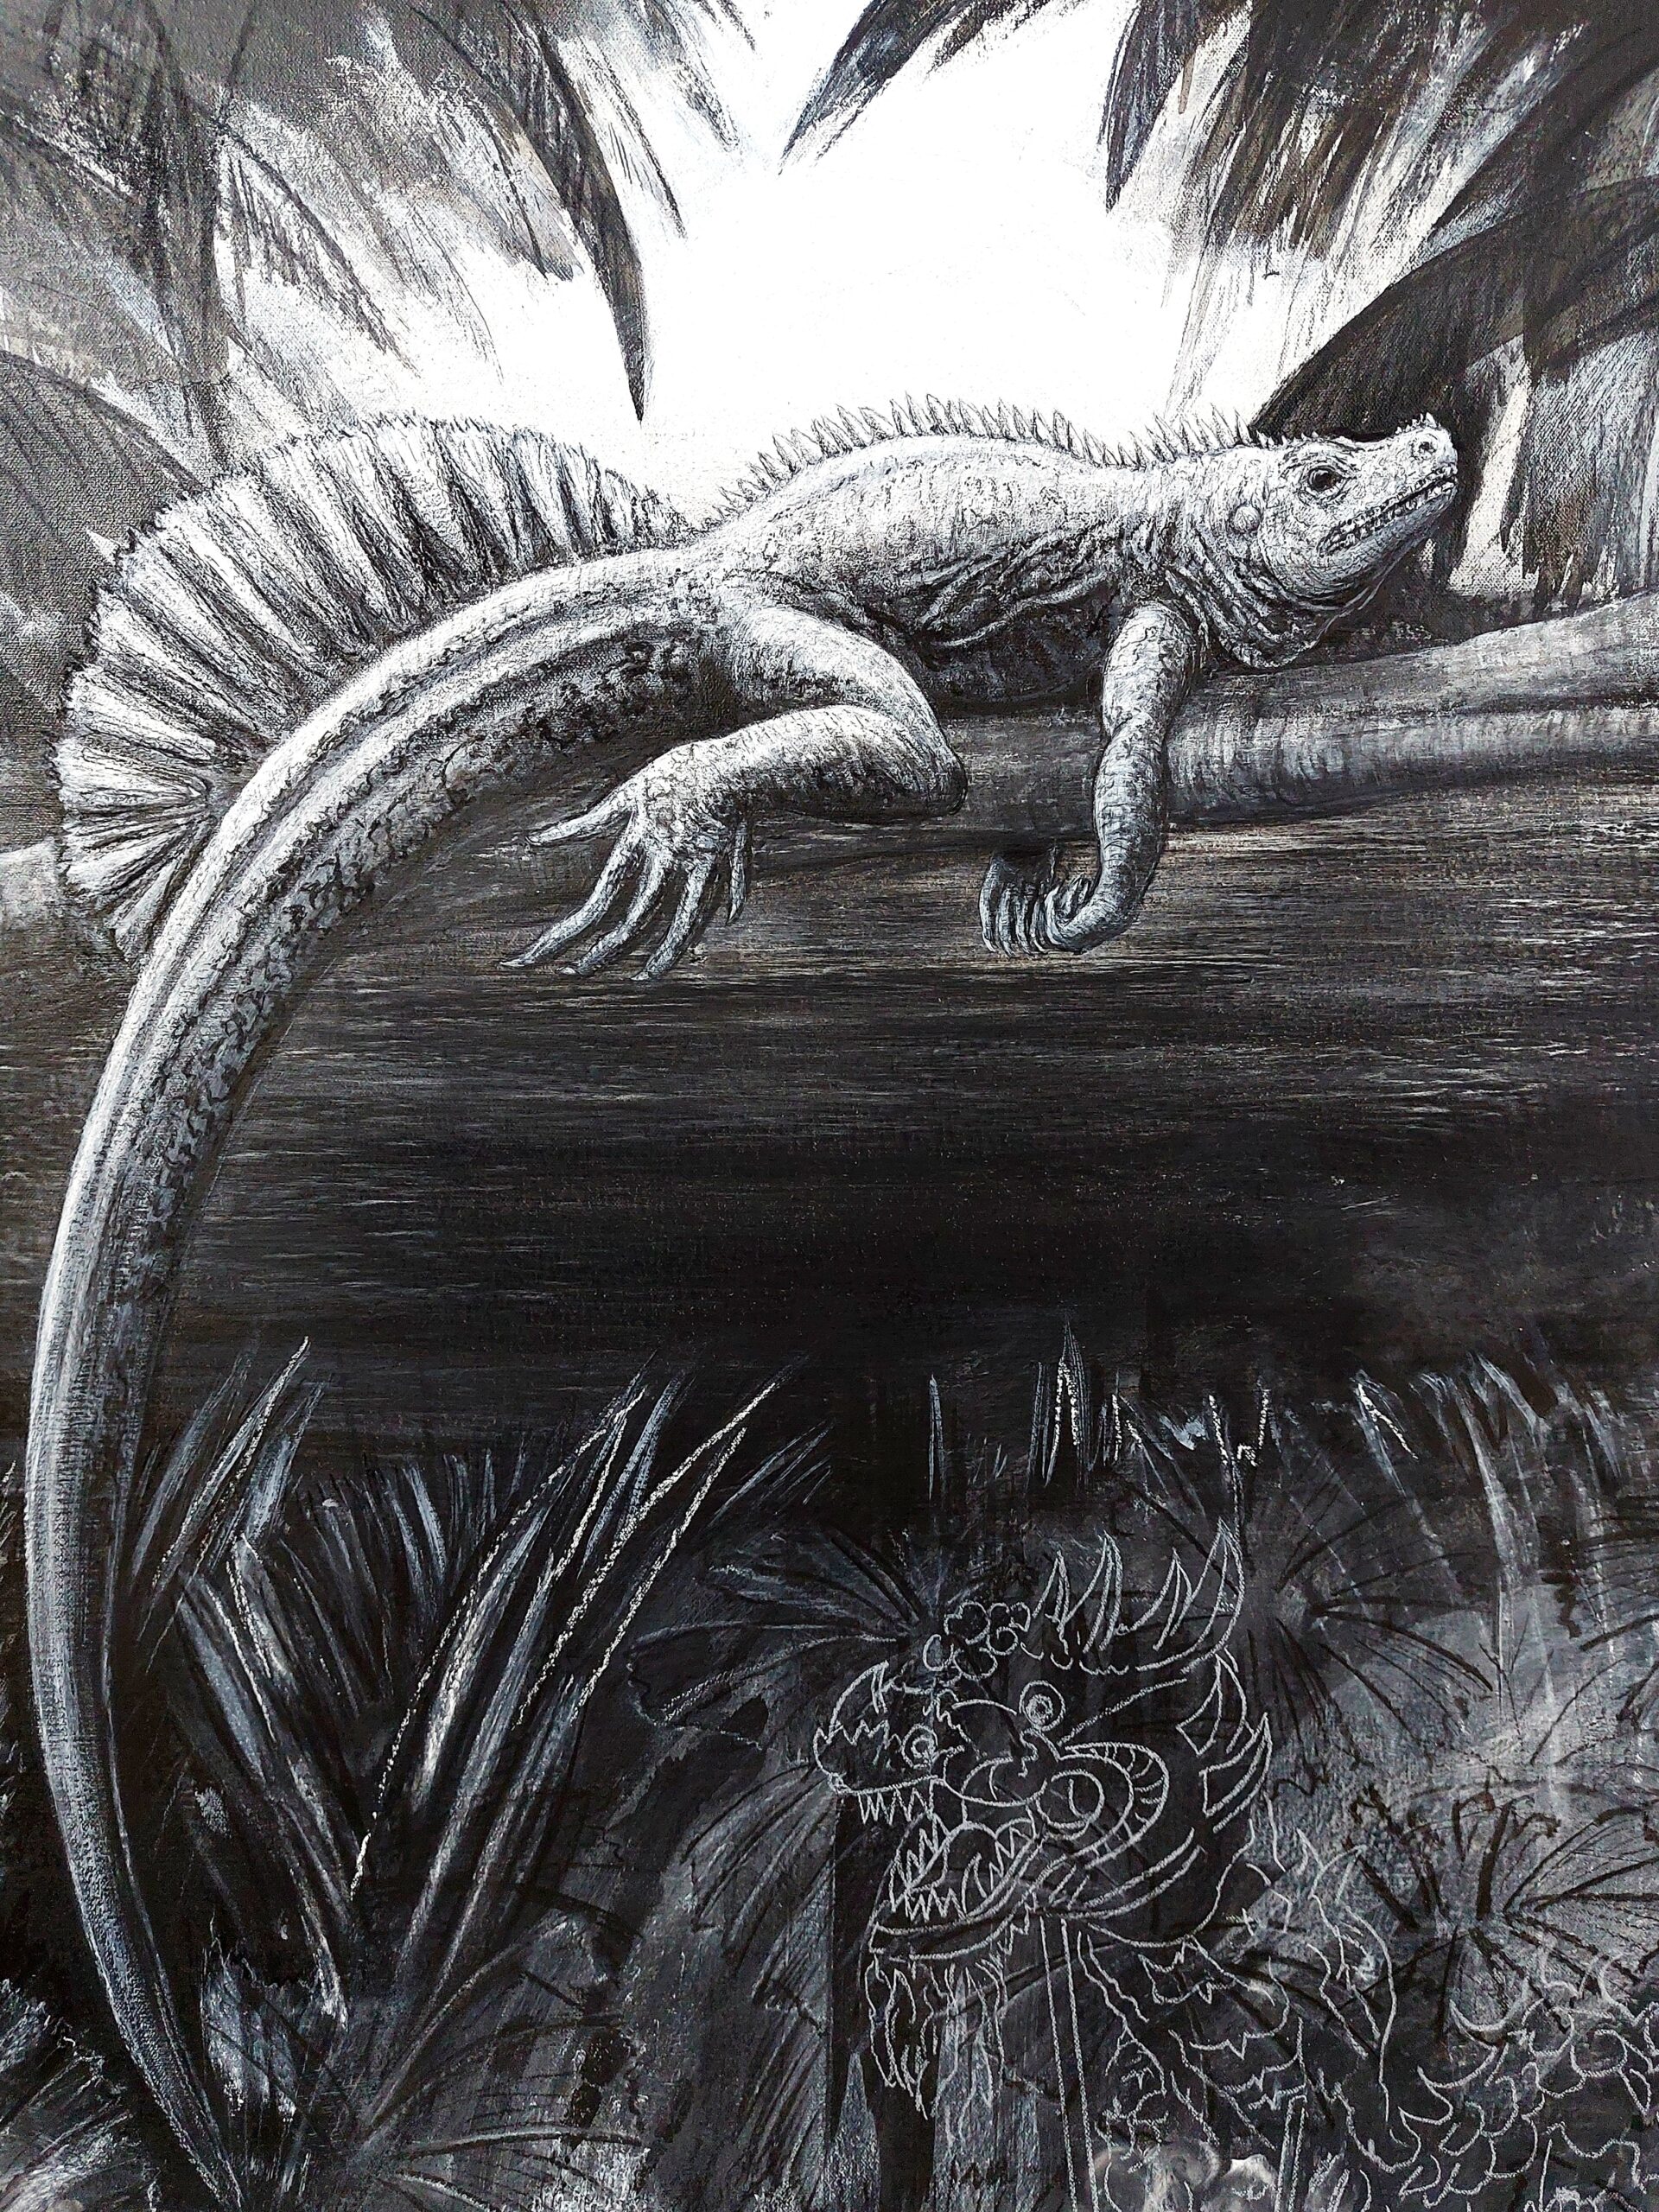 The Phillippine Sail Fin Lizard, 2022. Charcoal, chalk and gesso on canvas. 71 x 61 cm.